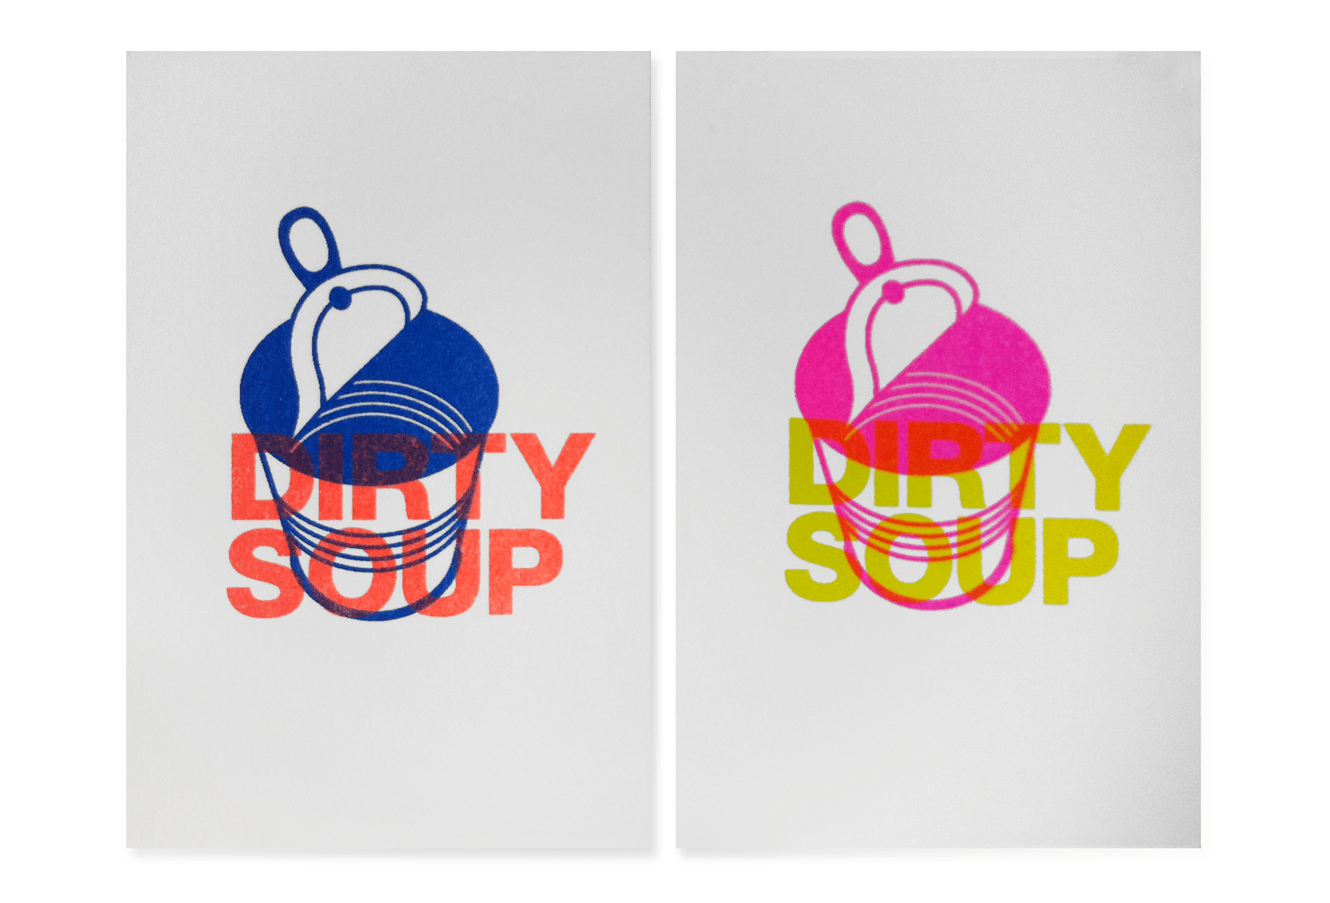 Dirty Soup Business Cards Designed By &&& Creative